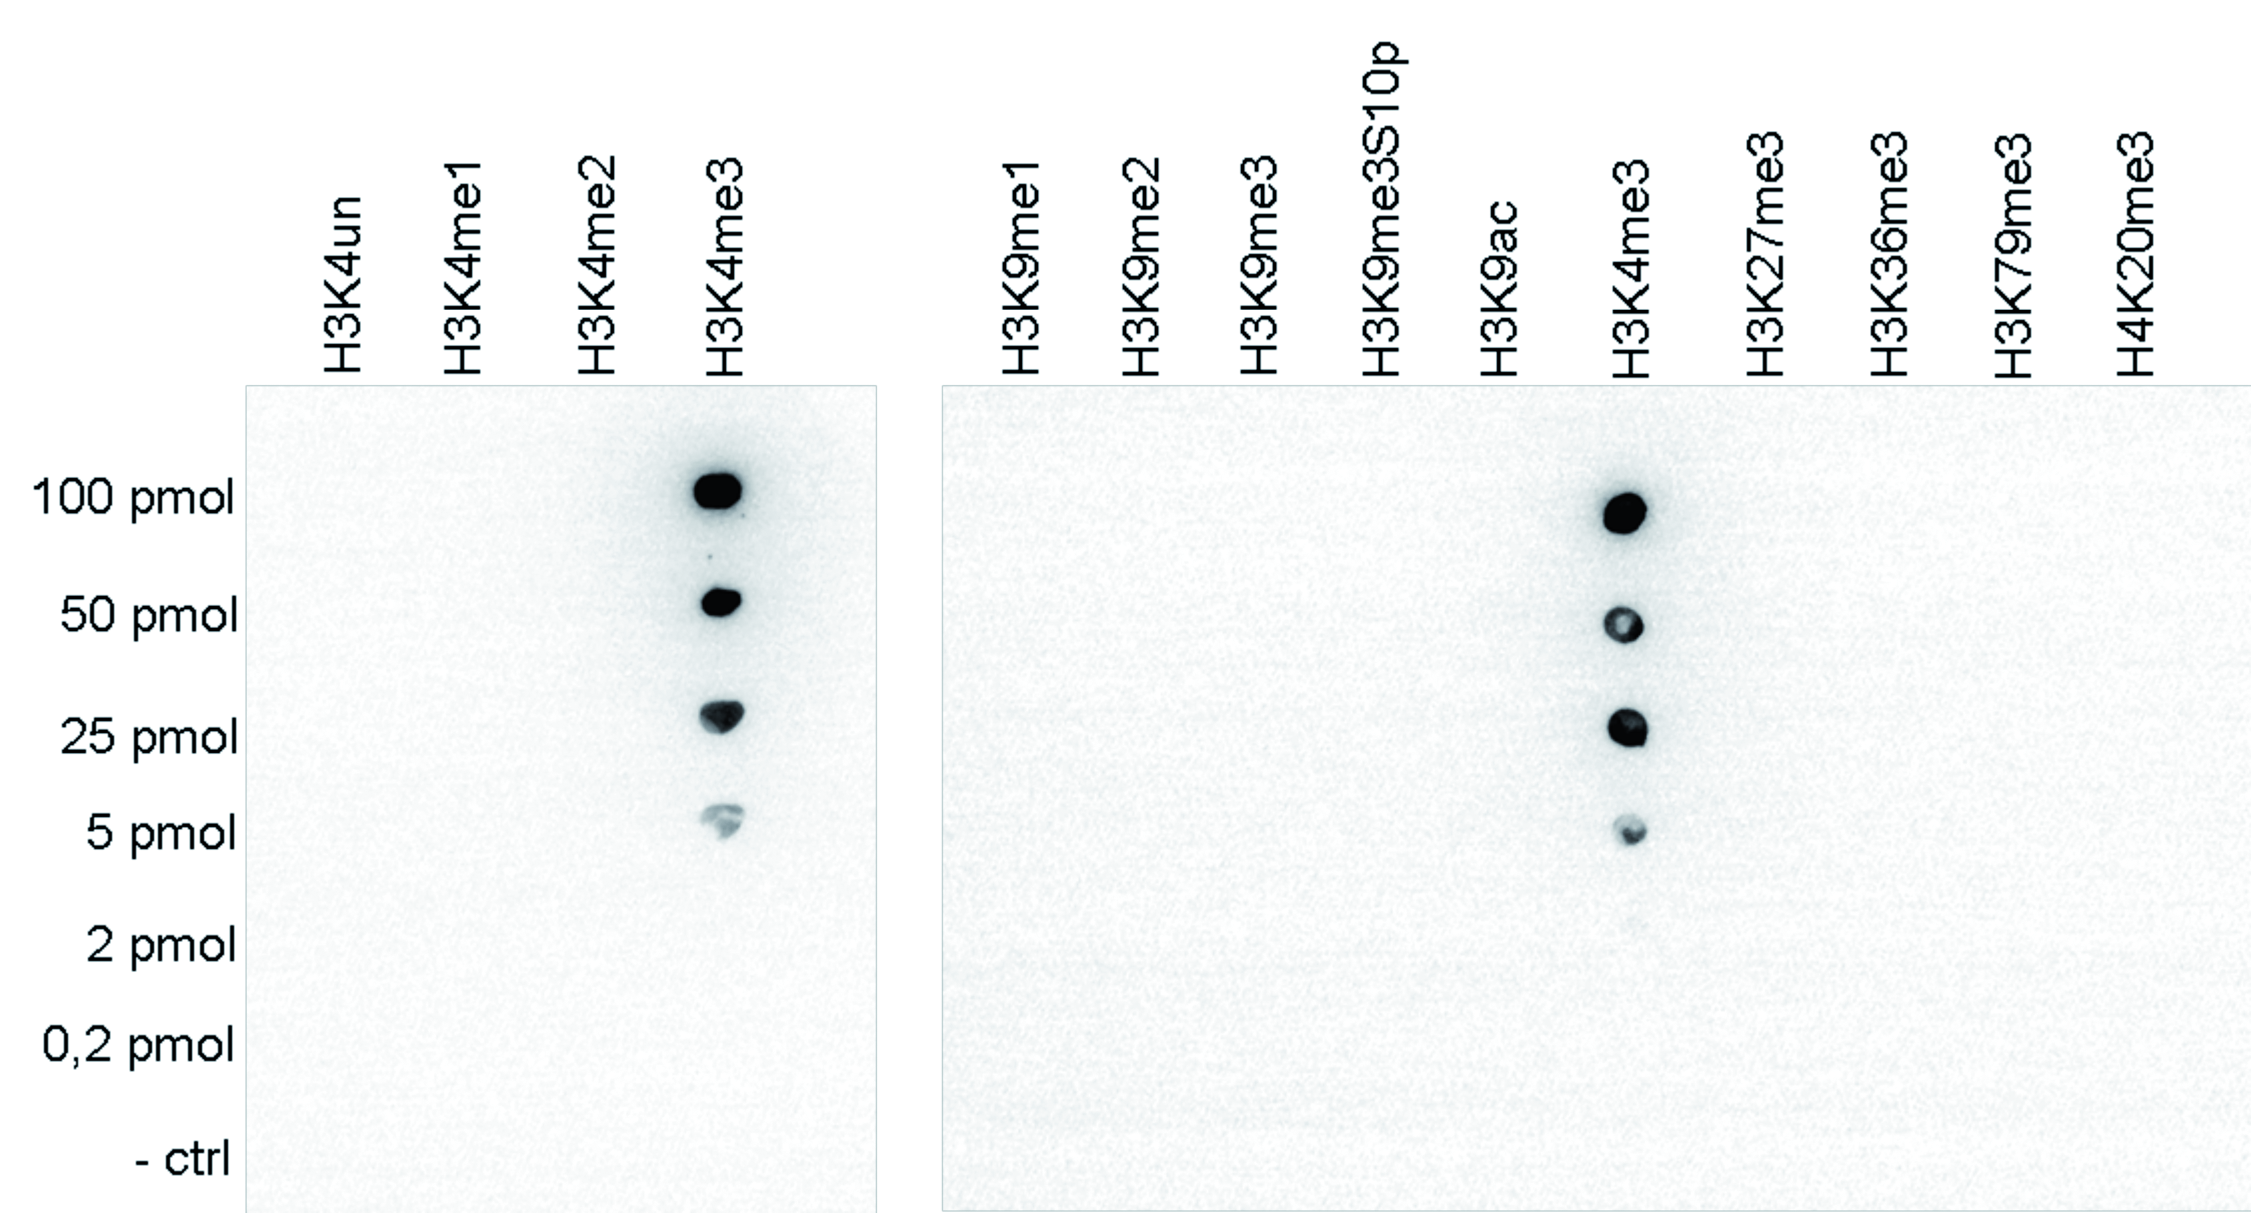 A Dot Blot analysis was performed to test the cross reactivity of H3K4me3 antibody (bs-53034R) with peptides containing other modifications and unmodified sequences of histone H3 and H4. One hundred to 0.2 pmol of the respective peptides were spotted on a membrane. The antibody was used at a dilution of 1:2,000. The figure shows a high specificity of the antibody for the modification of interest.